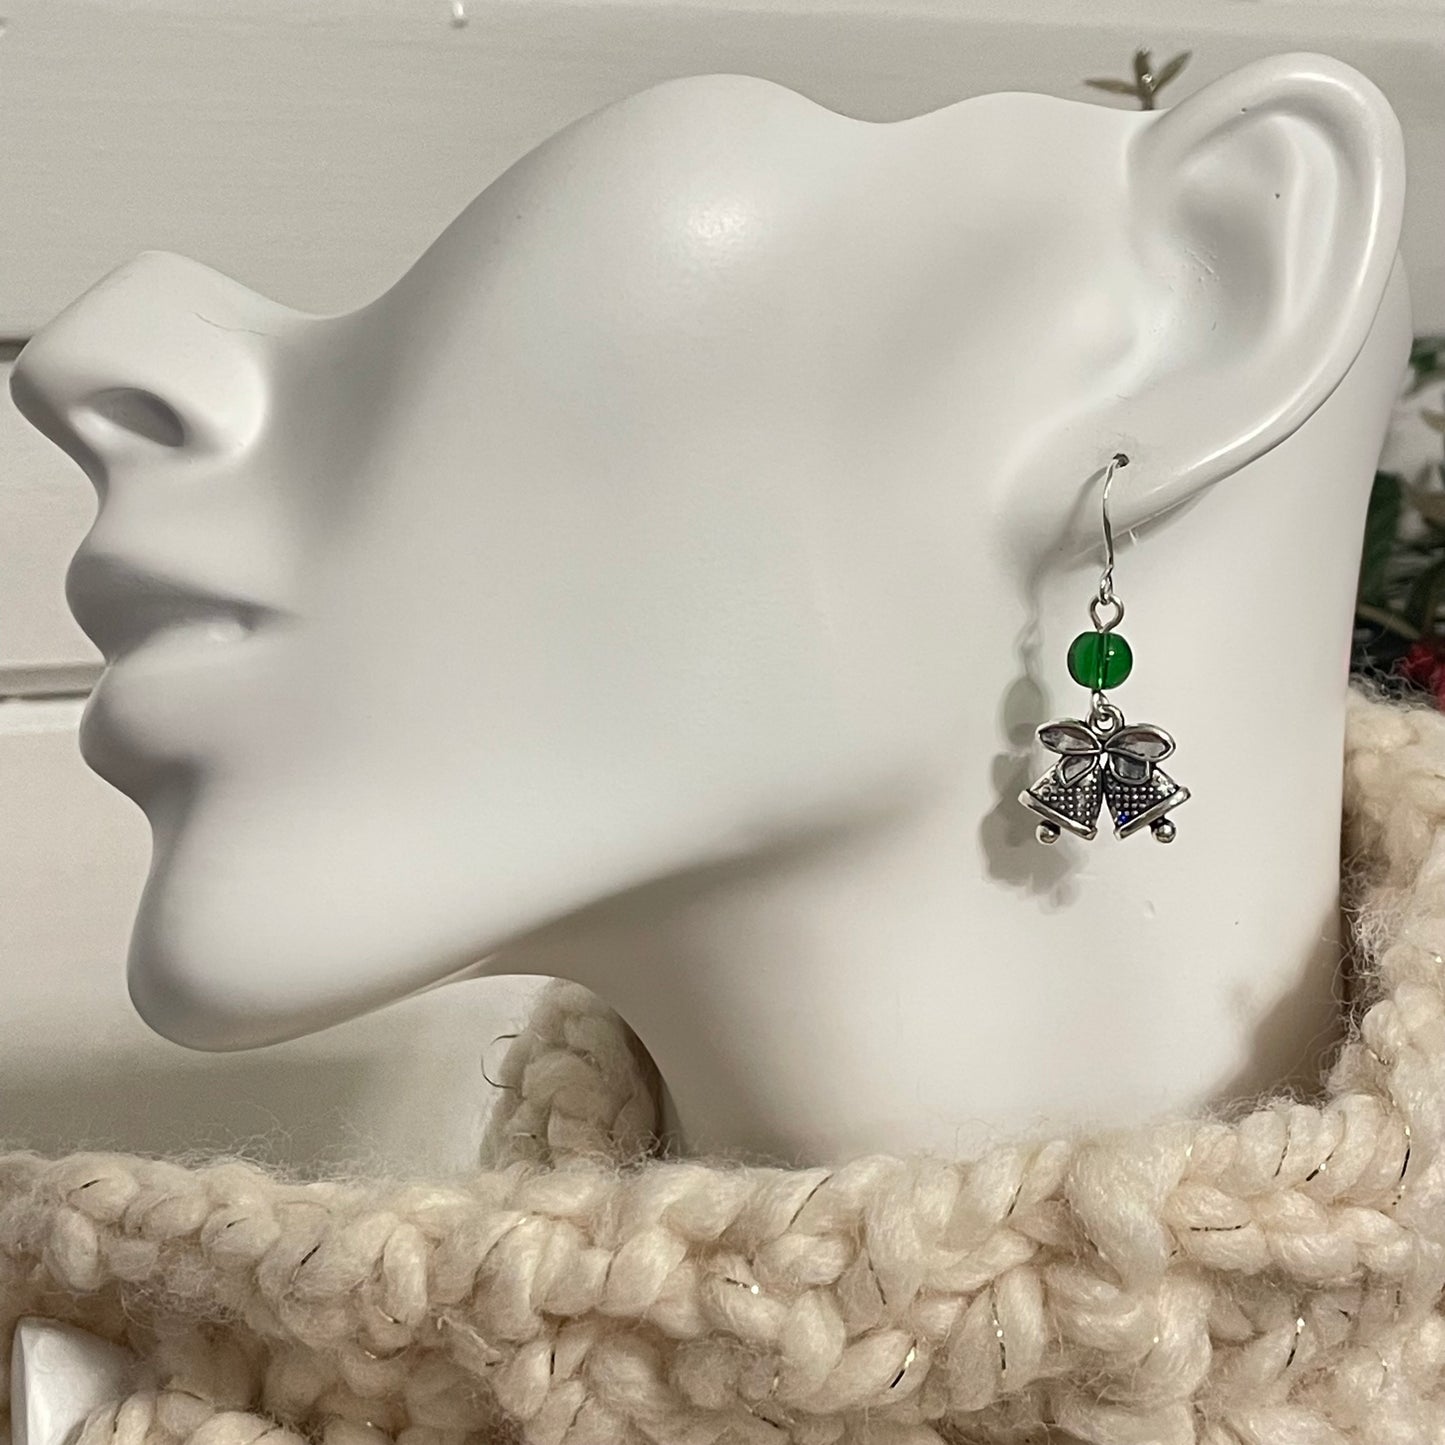 Handmade Bell Charm Earrings Round Bead Accent Holiday Christmas Stocking December Secret Santa Mixed Metal Green Glass